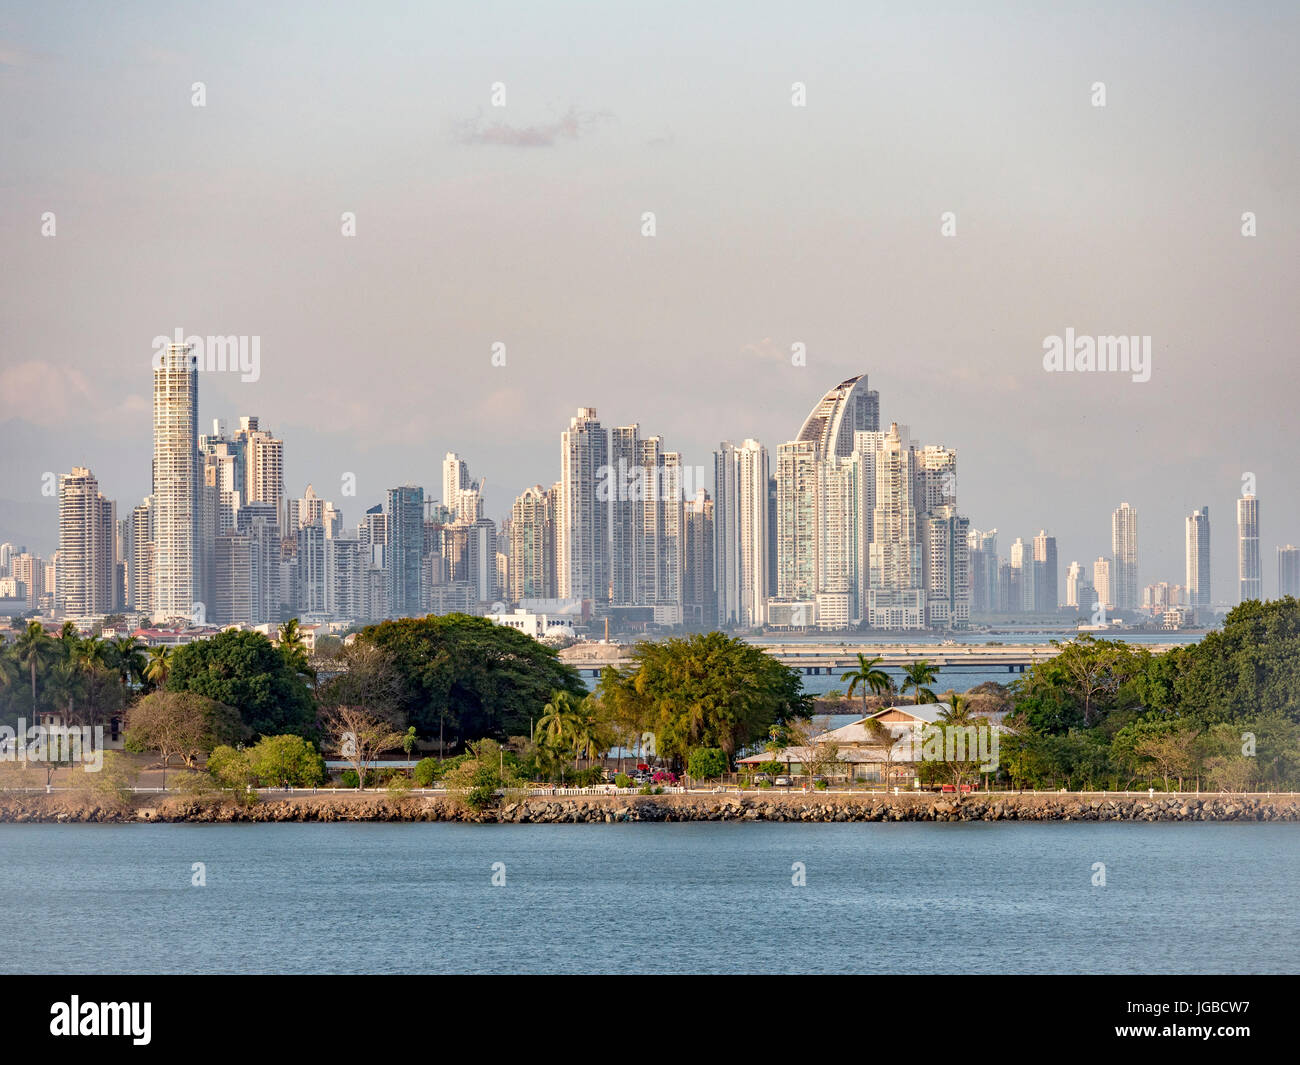 The Skyline Of Modern Panama City In The Republic Of Panama April 2017 Stock Photo